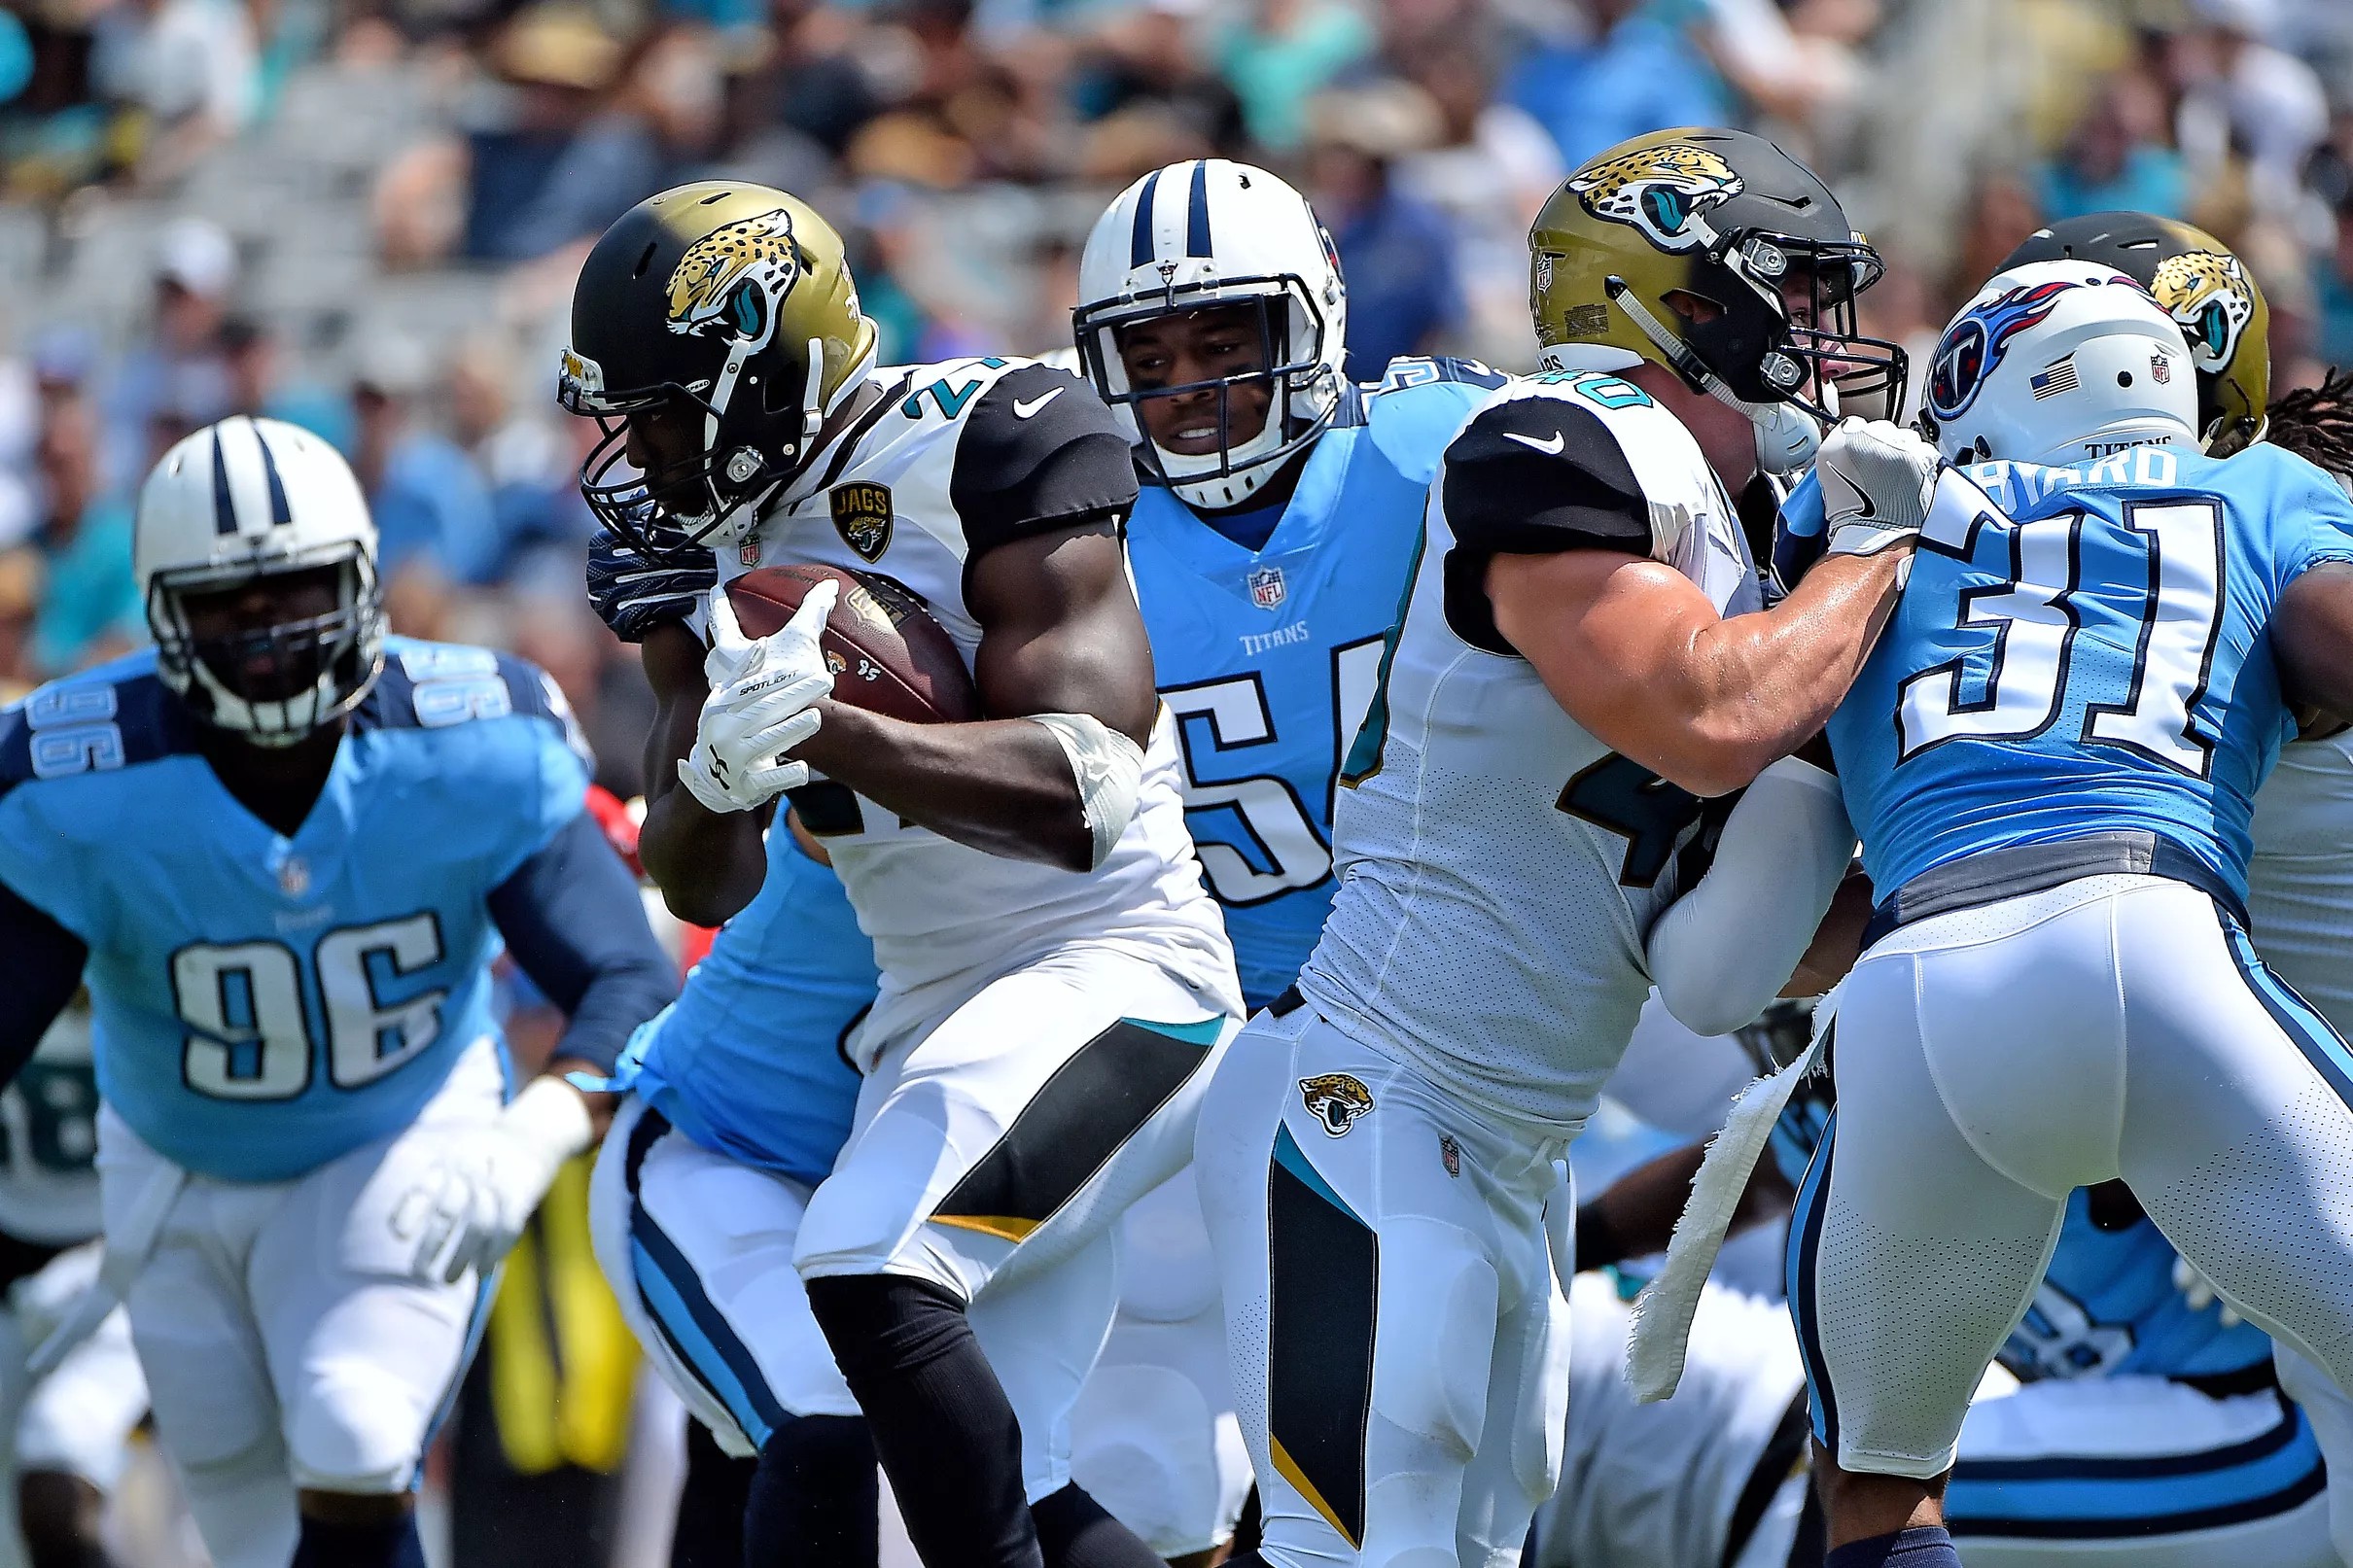 Jaguars vs. Titans Penalties and bad blocking highlight the most